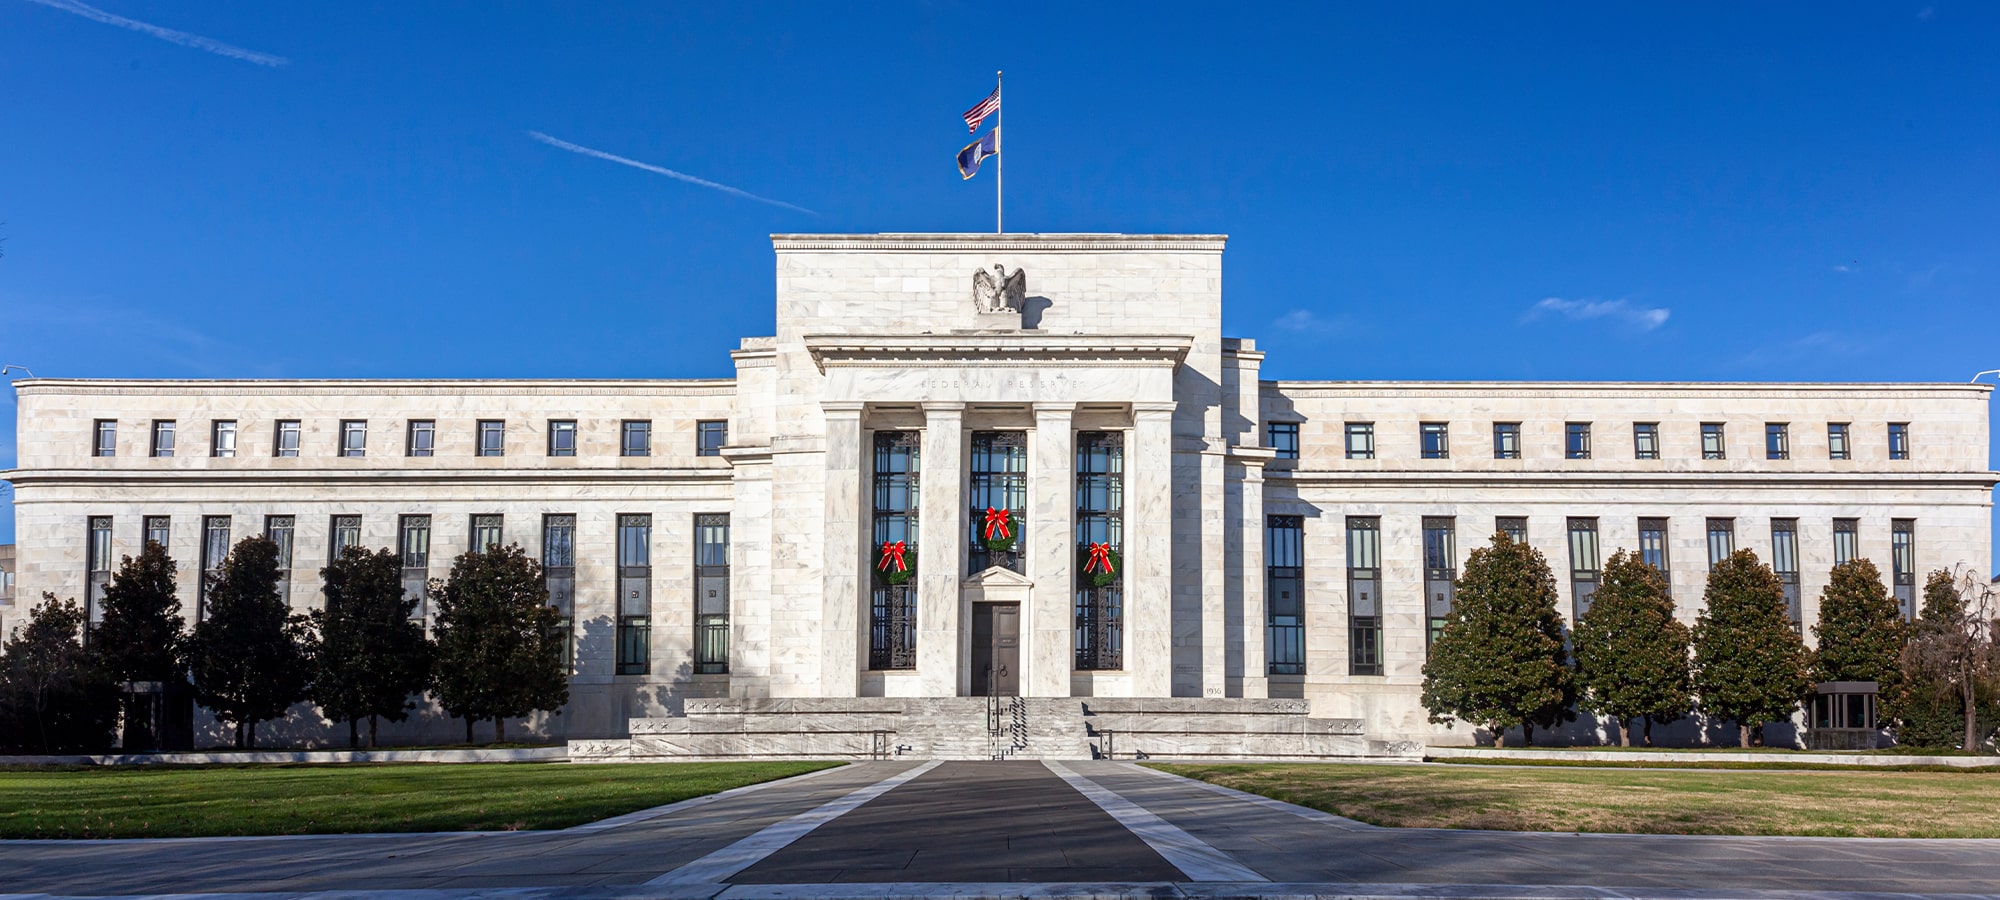 Are Your Traders Prepared for the Fed and ECB Interest Rate Decisions This Month?